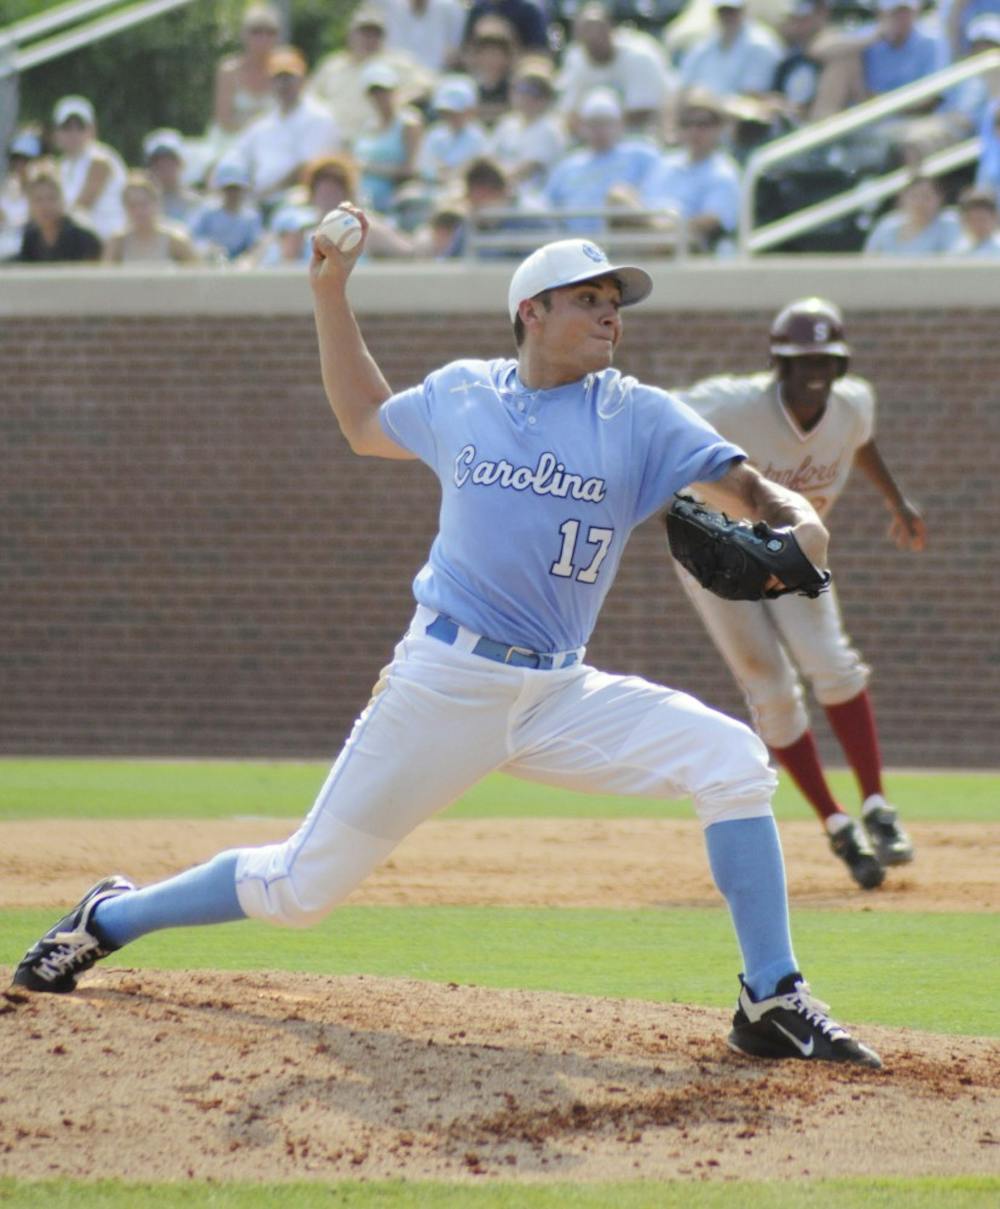 Photo: Tar Heels ride good pitching to 5-2 win (Amy Fourrier)